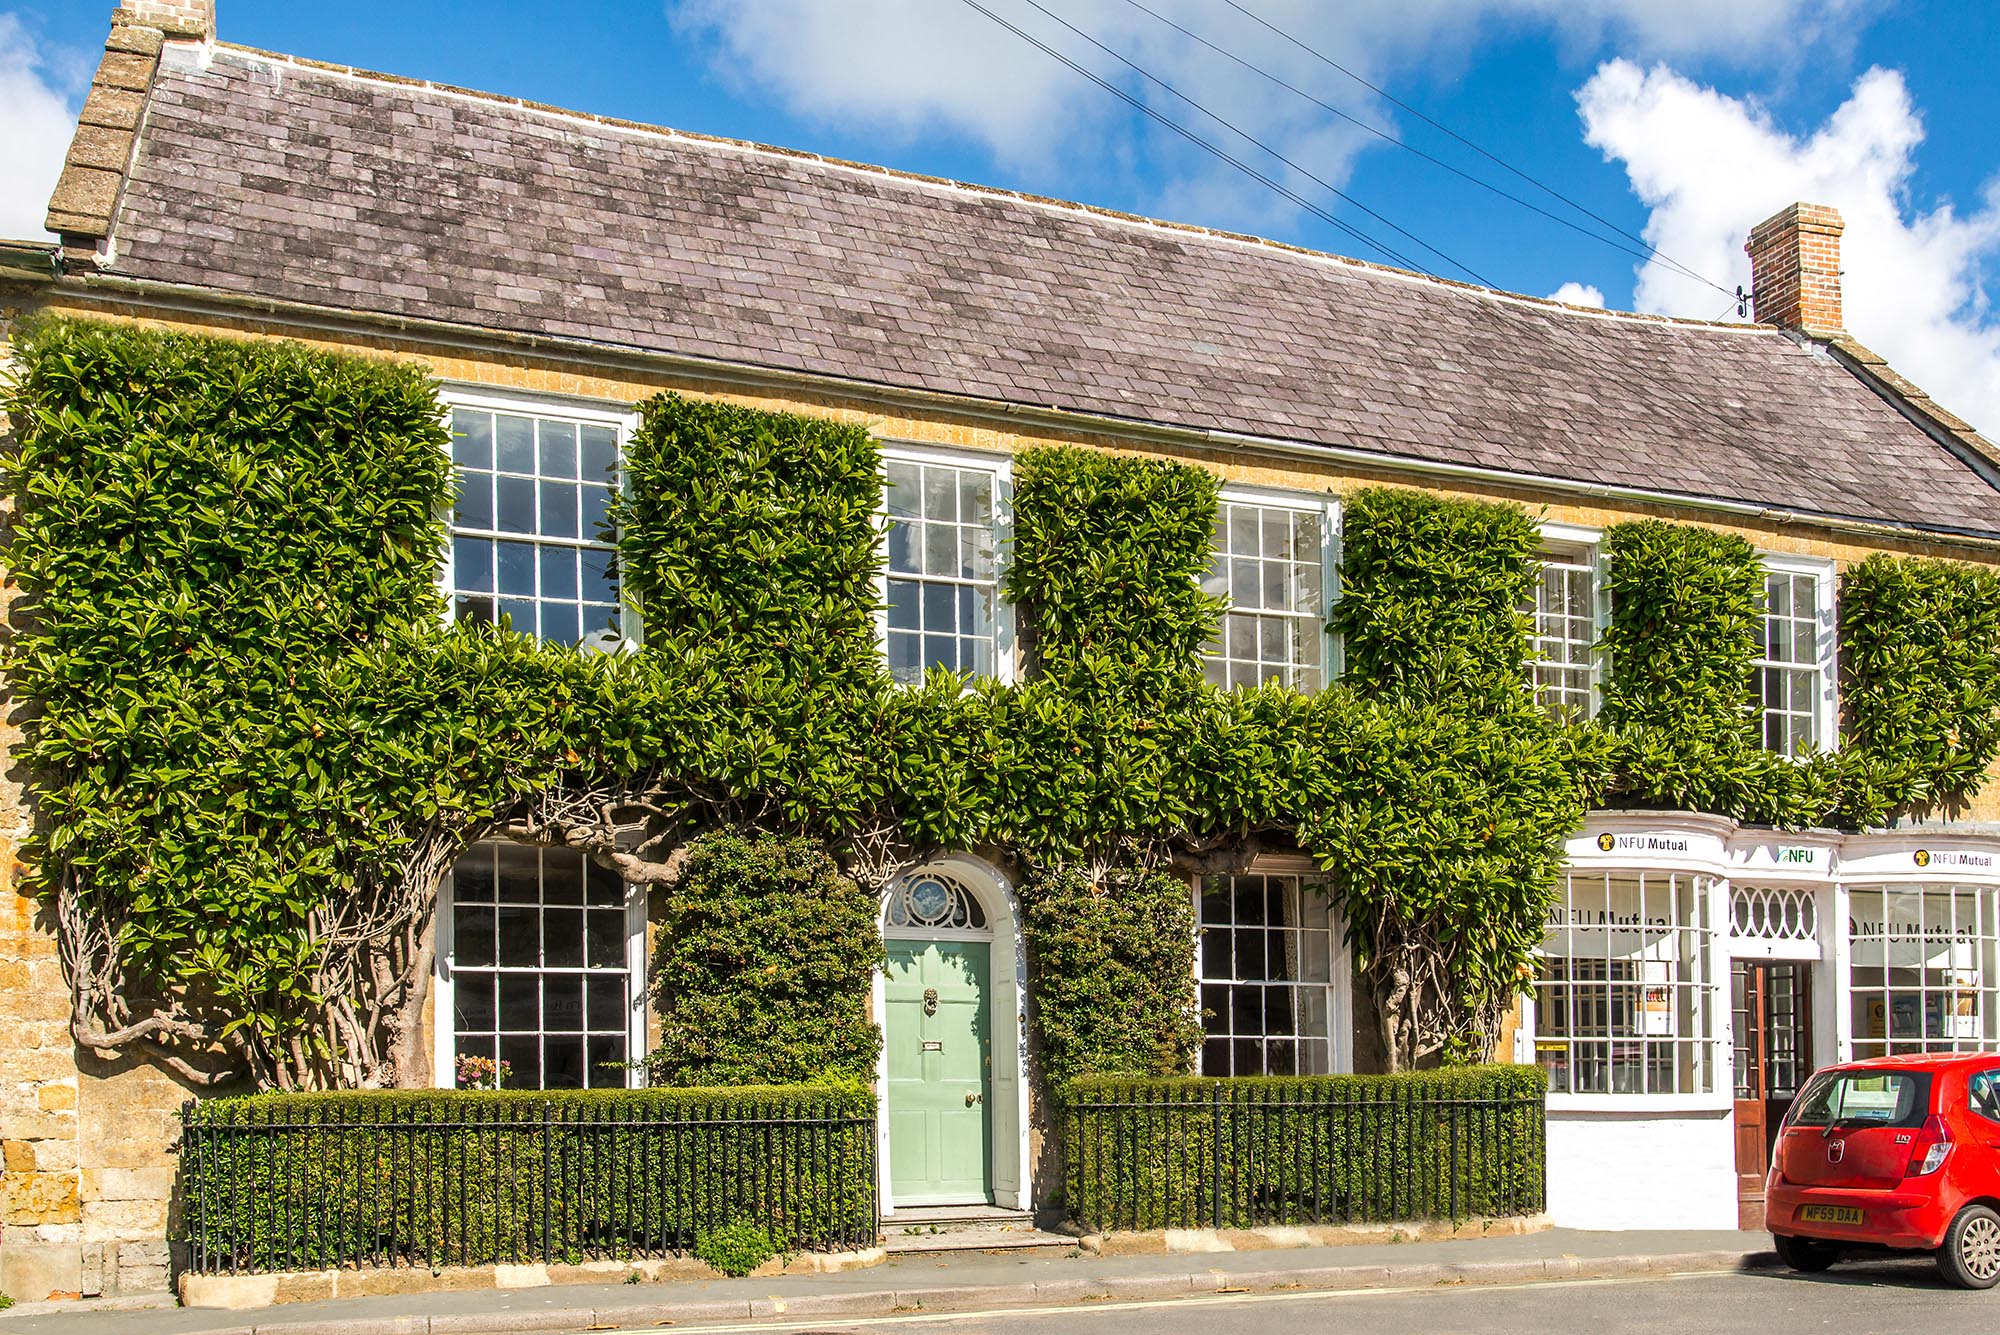 Magnolia House : Dreamy homes for sale in Dorset